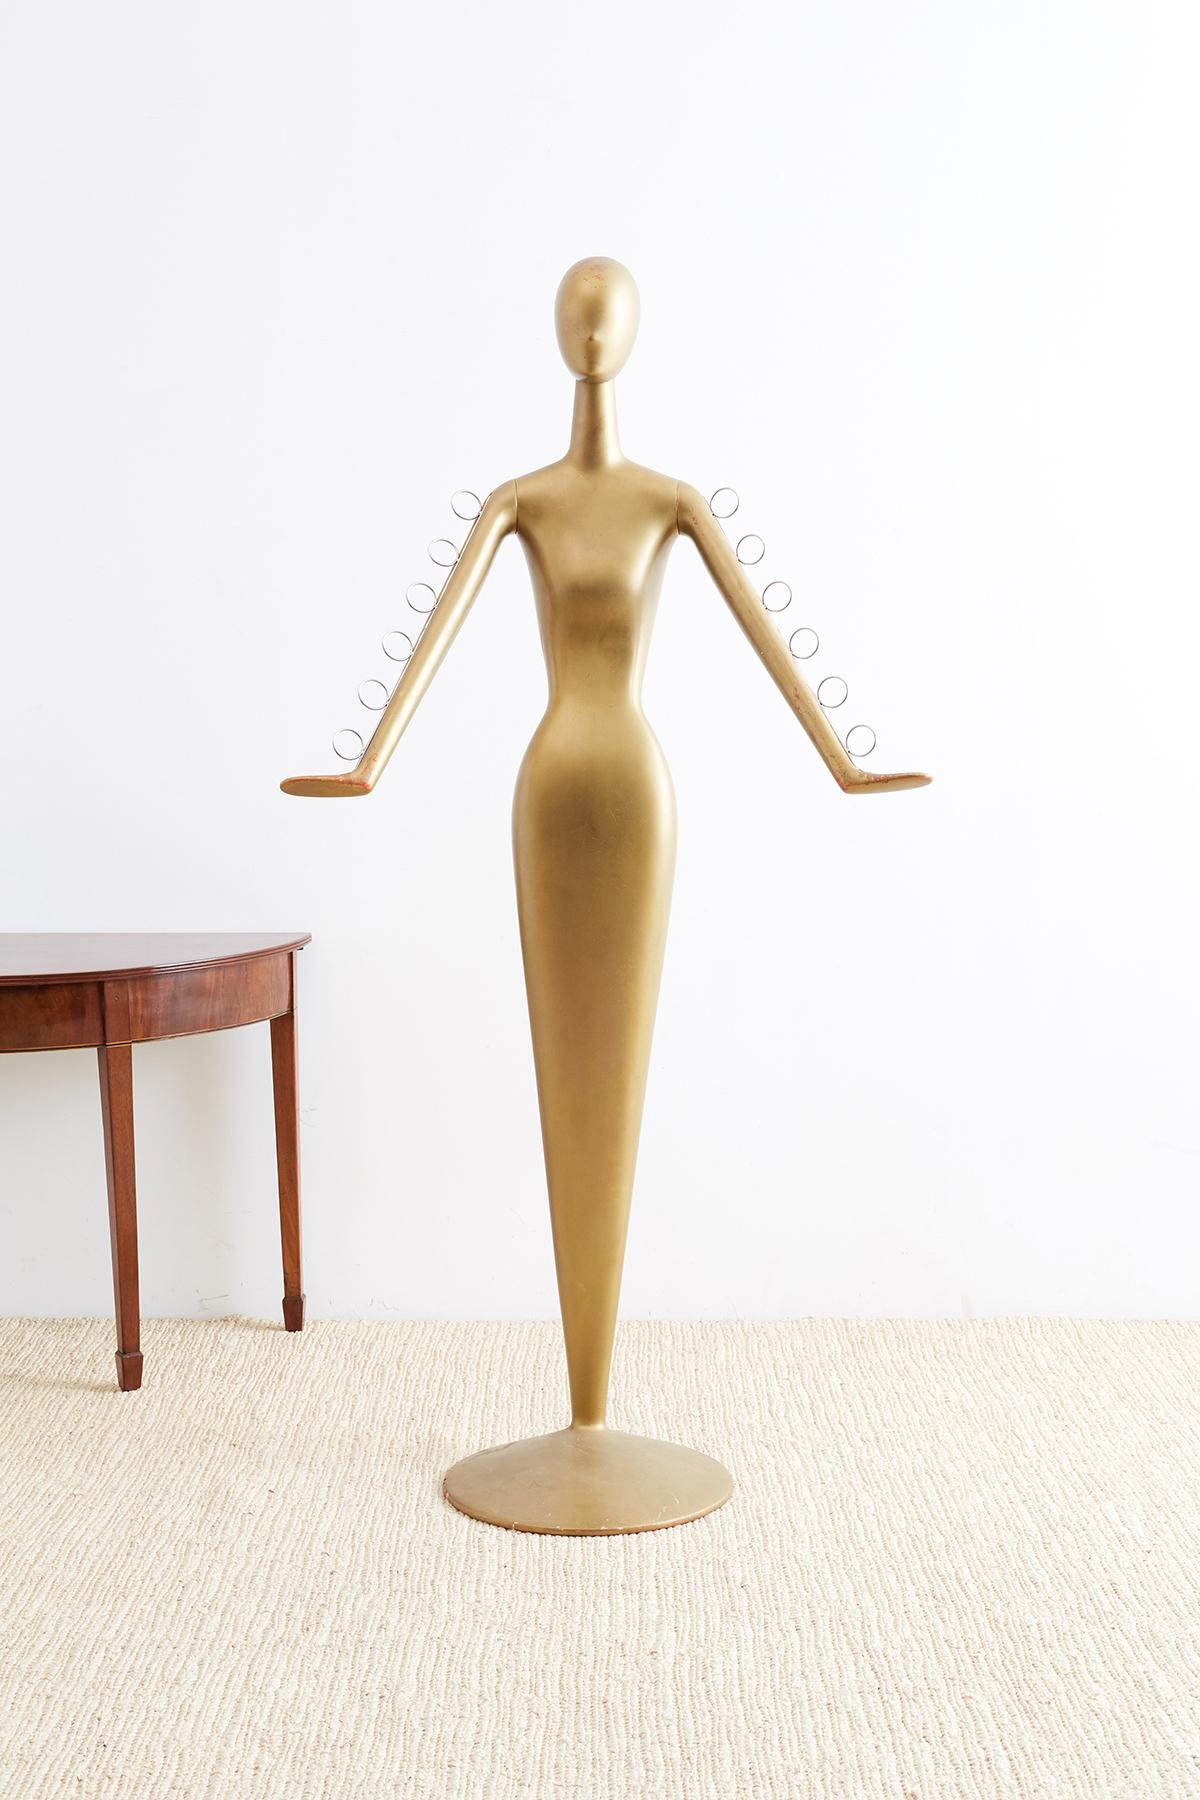 20th Century Abstract Tulip Form Female Mannequin Display Sculpture For Sale